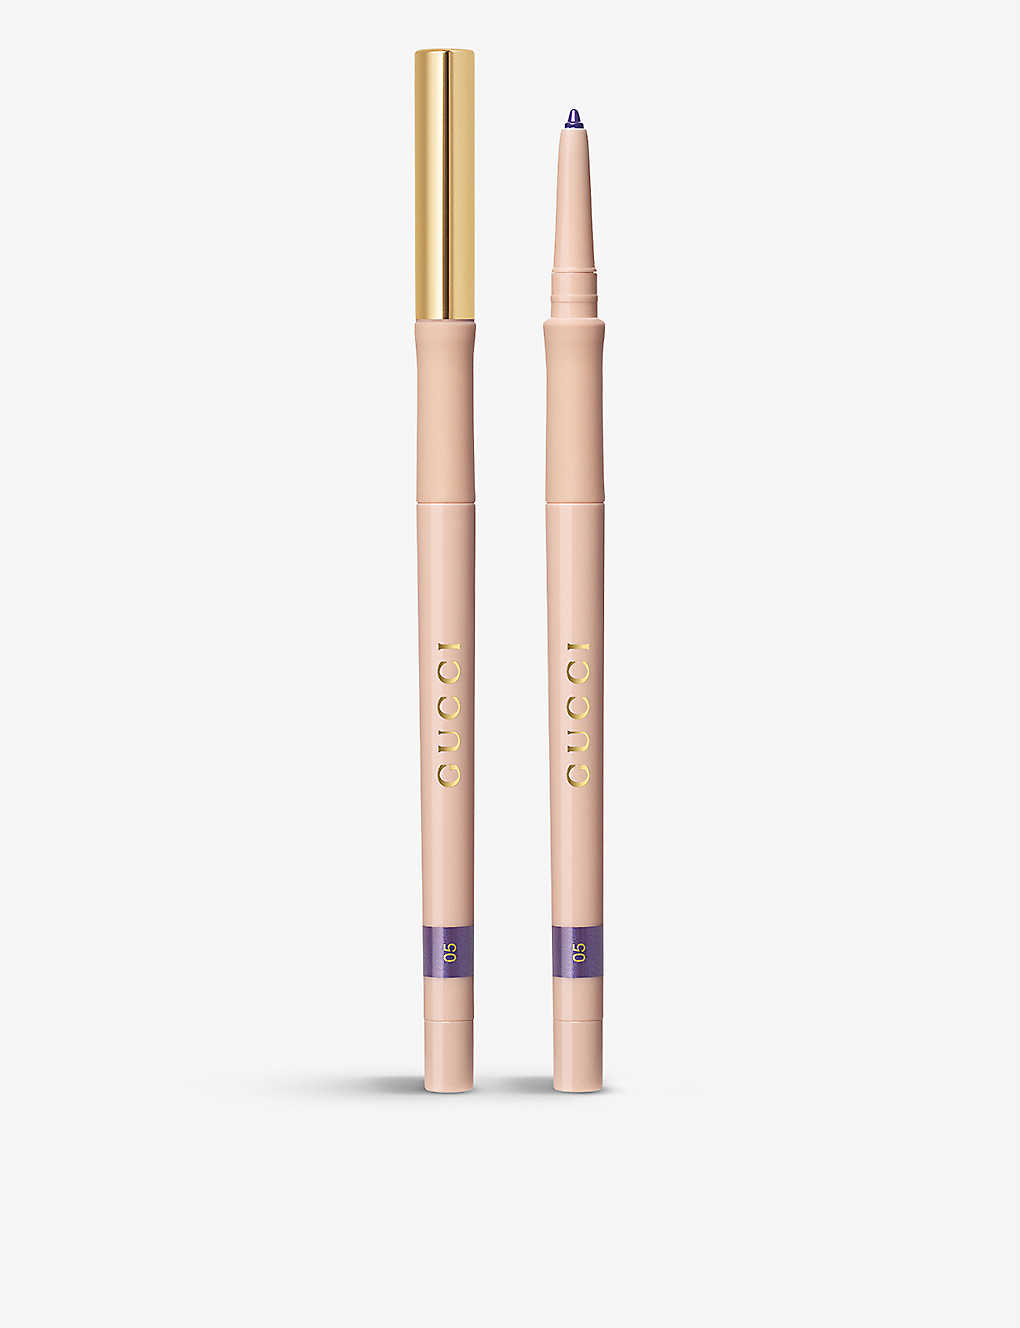 Gucci Stylo Contour Des Yeux Kohl Eye Liner 0.3g In 005